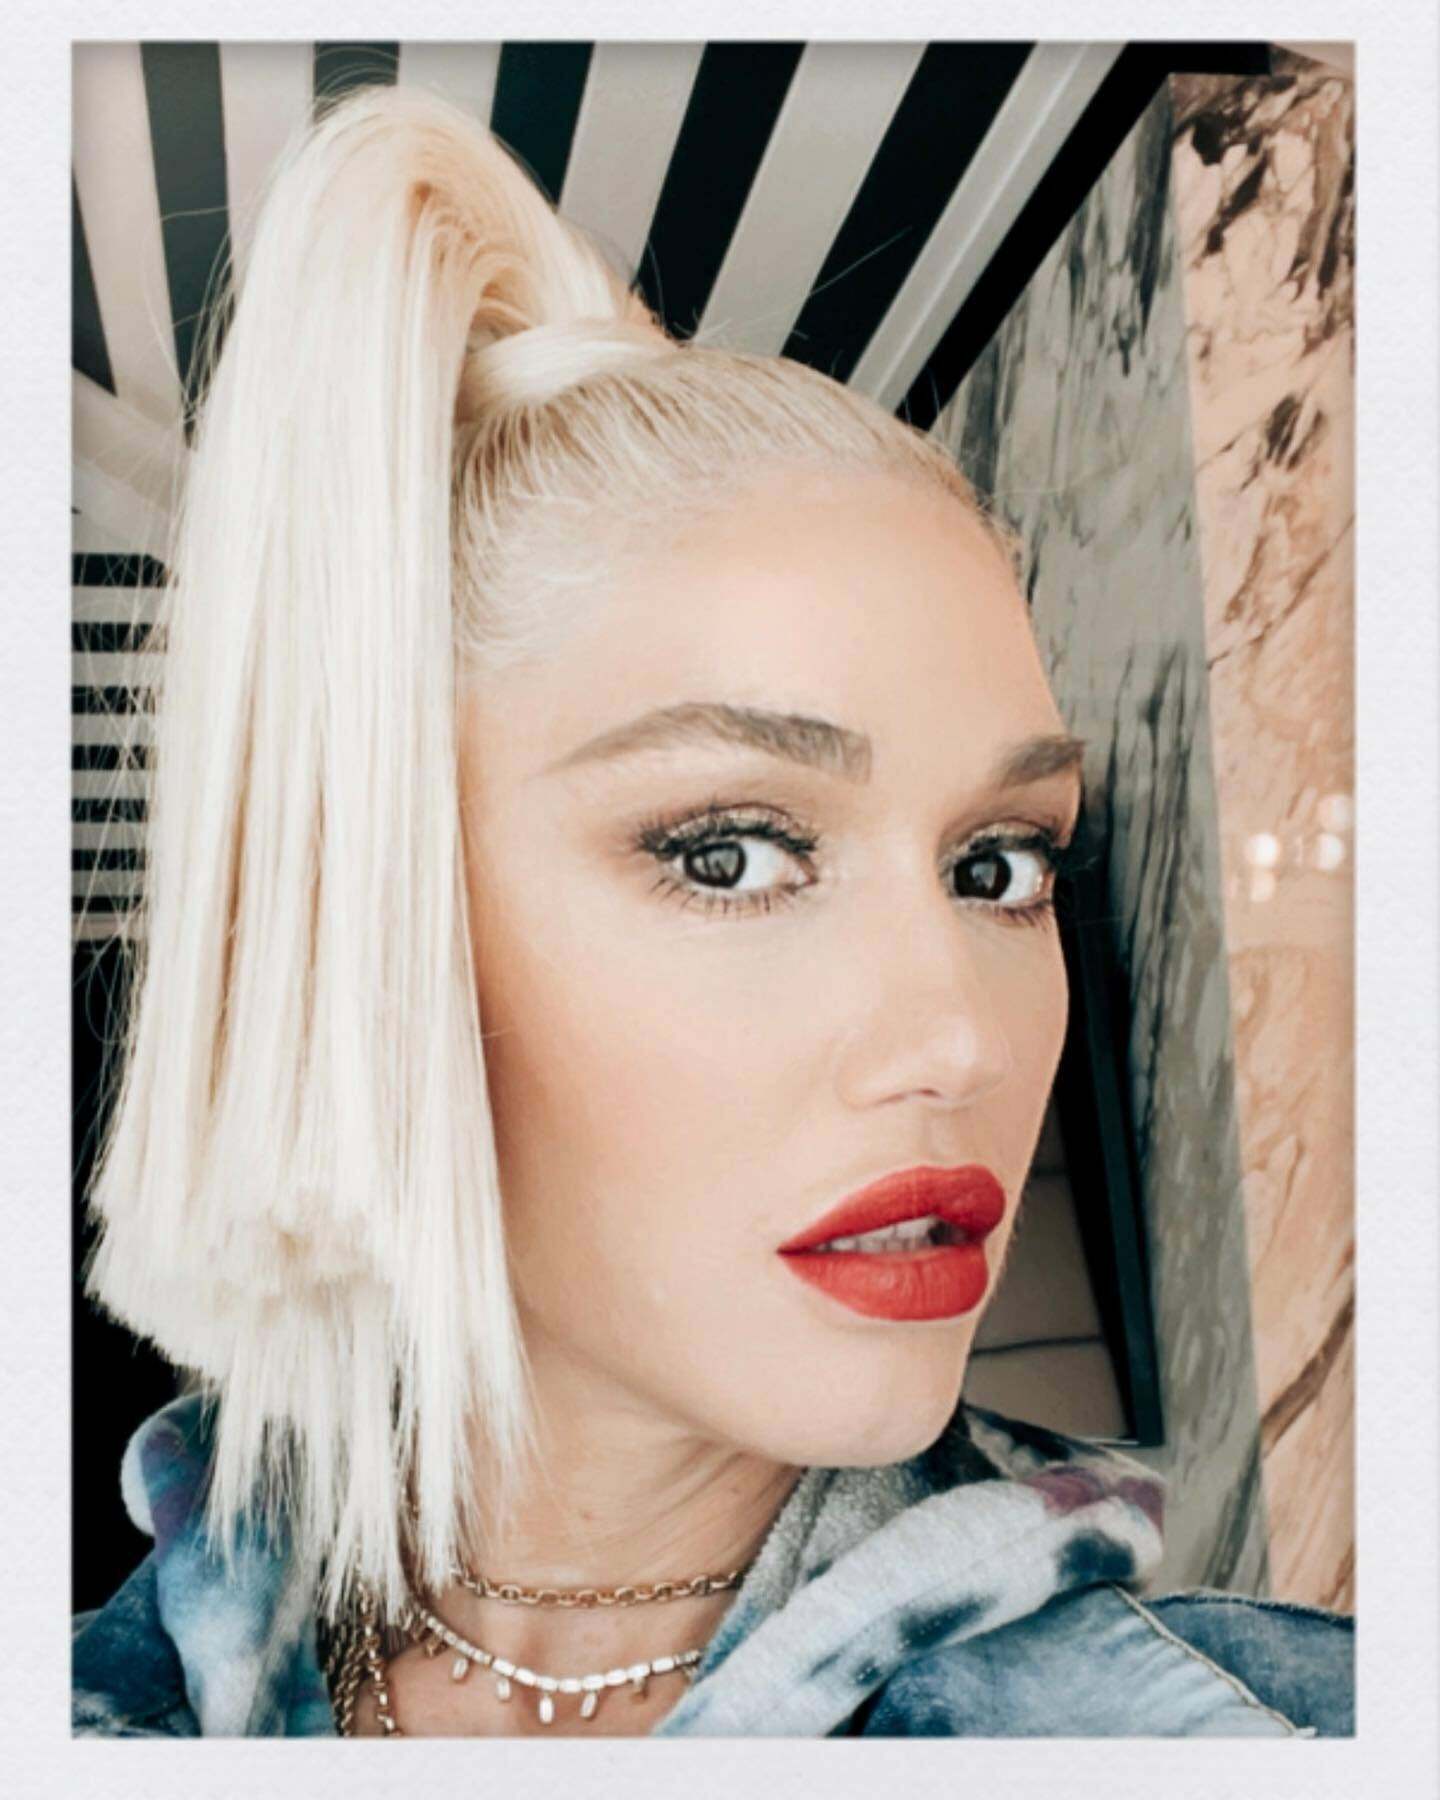 51 year old Gwen Stefani has me wanting to facefuck